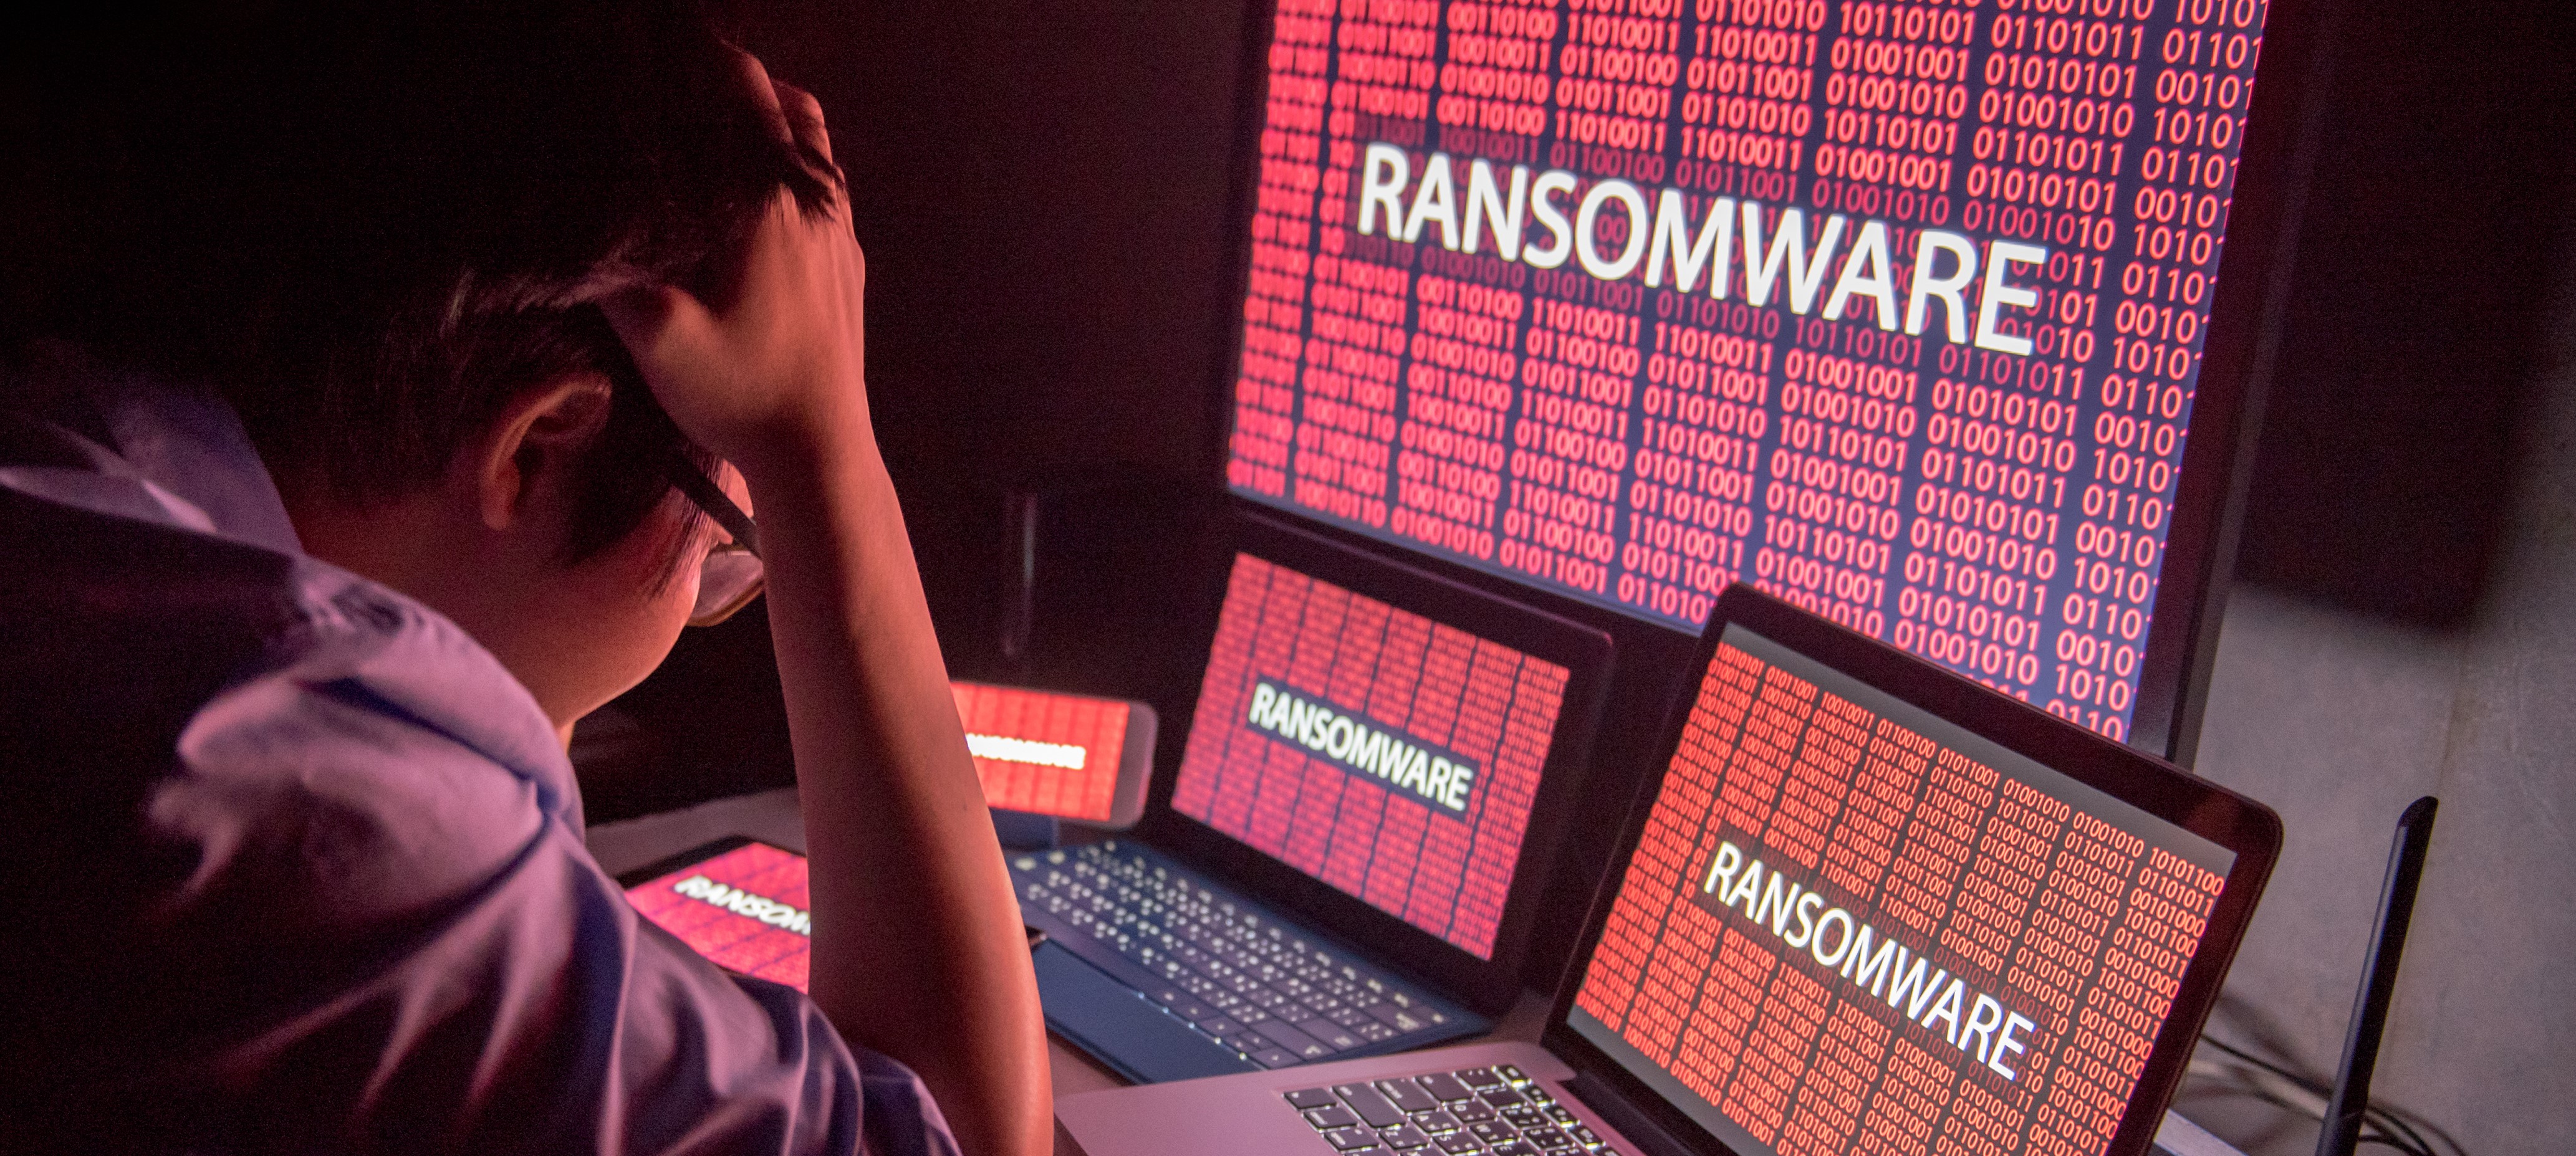 Ransomware is scary…